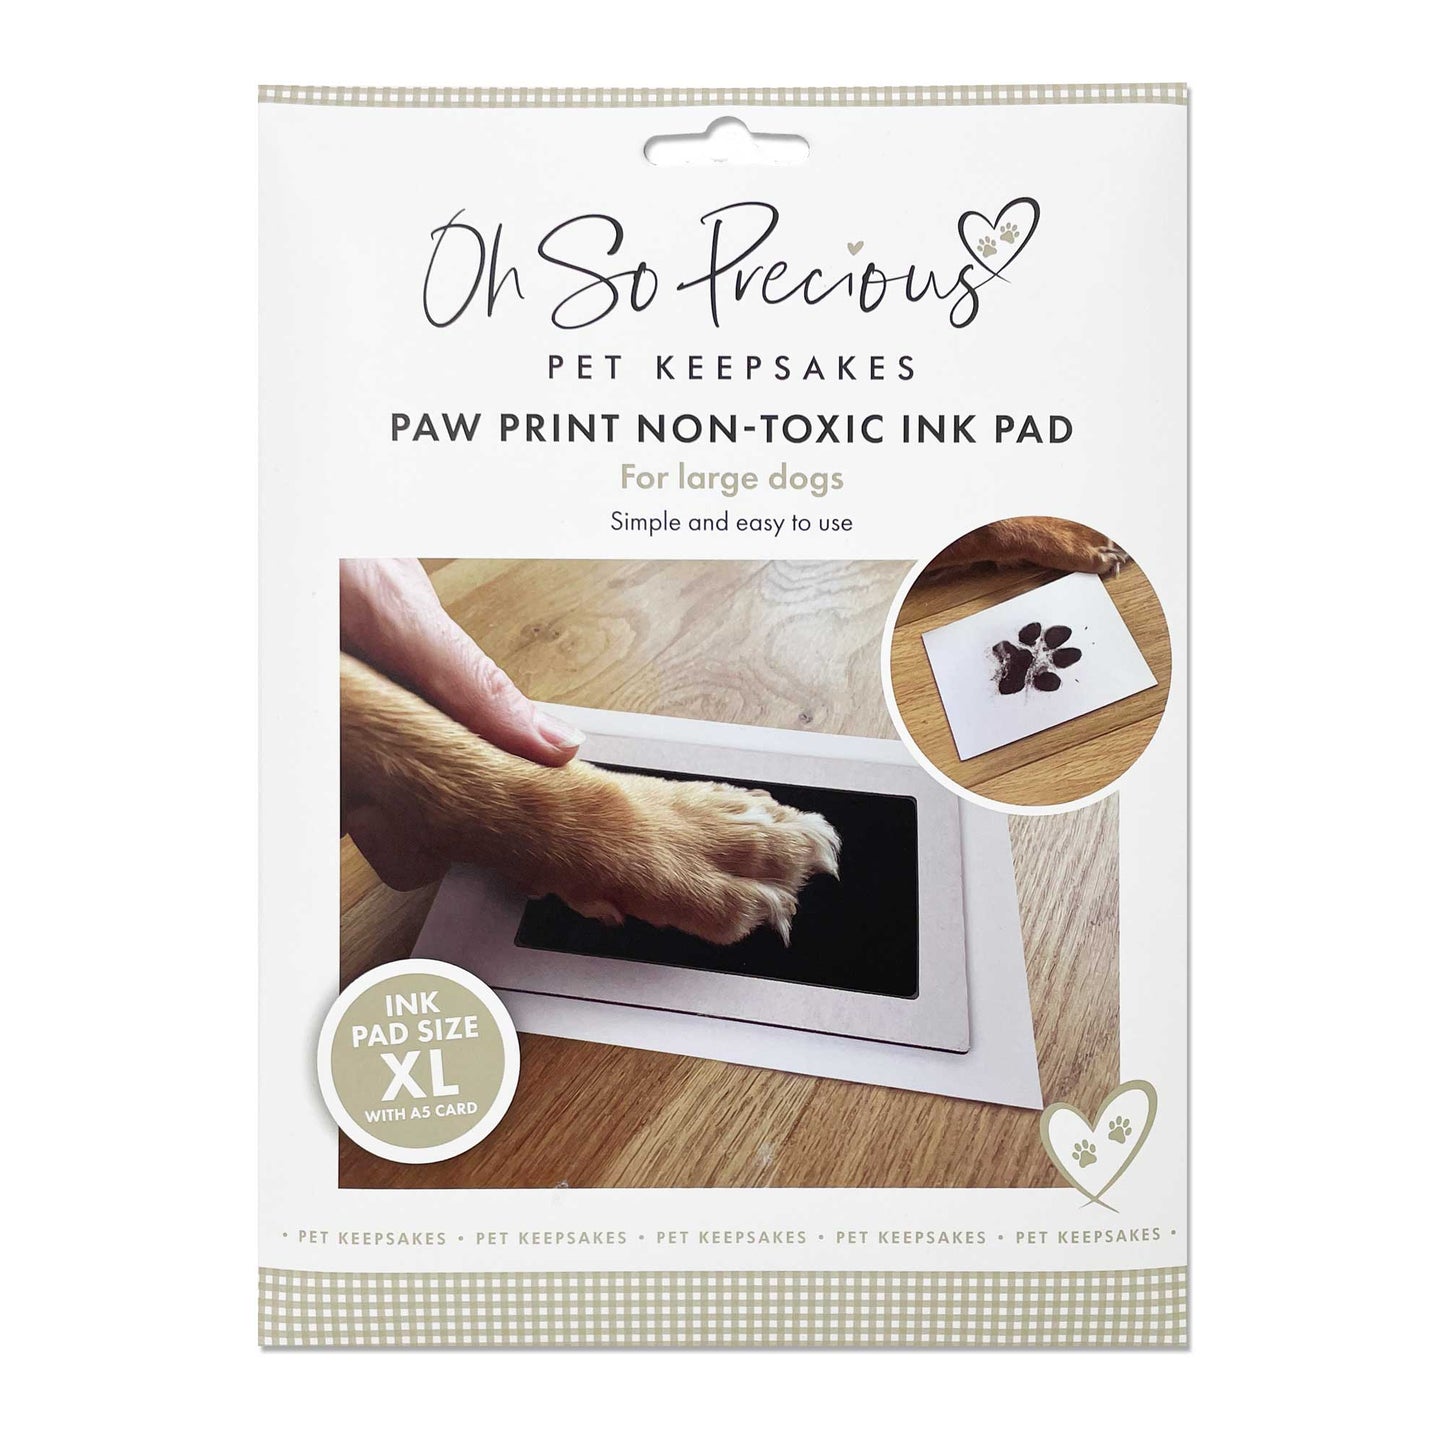 Oh So Precious Paw Print Non-Toxic Ink Pad For Larger Paws